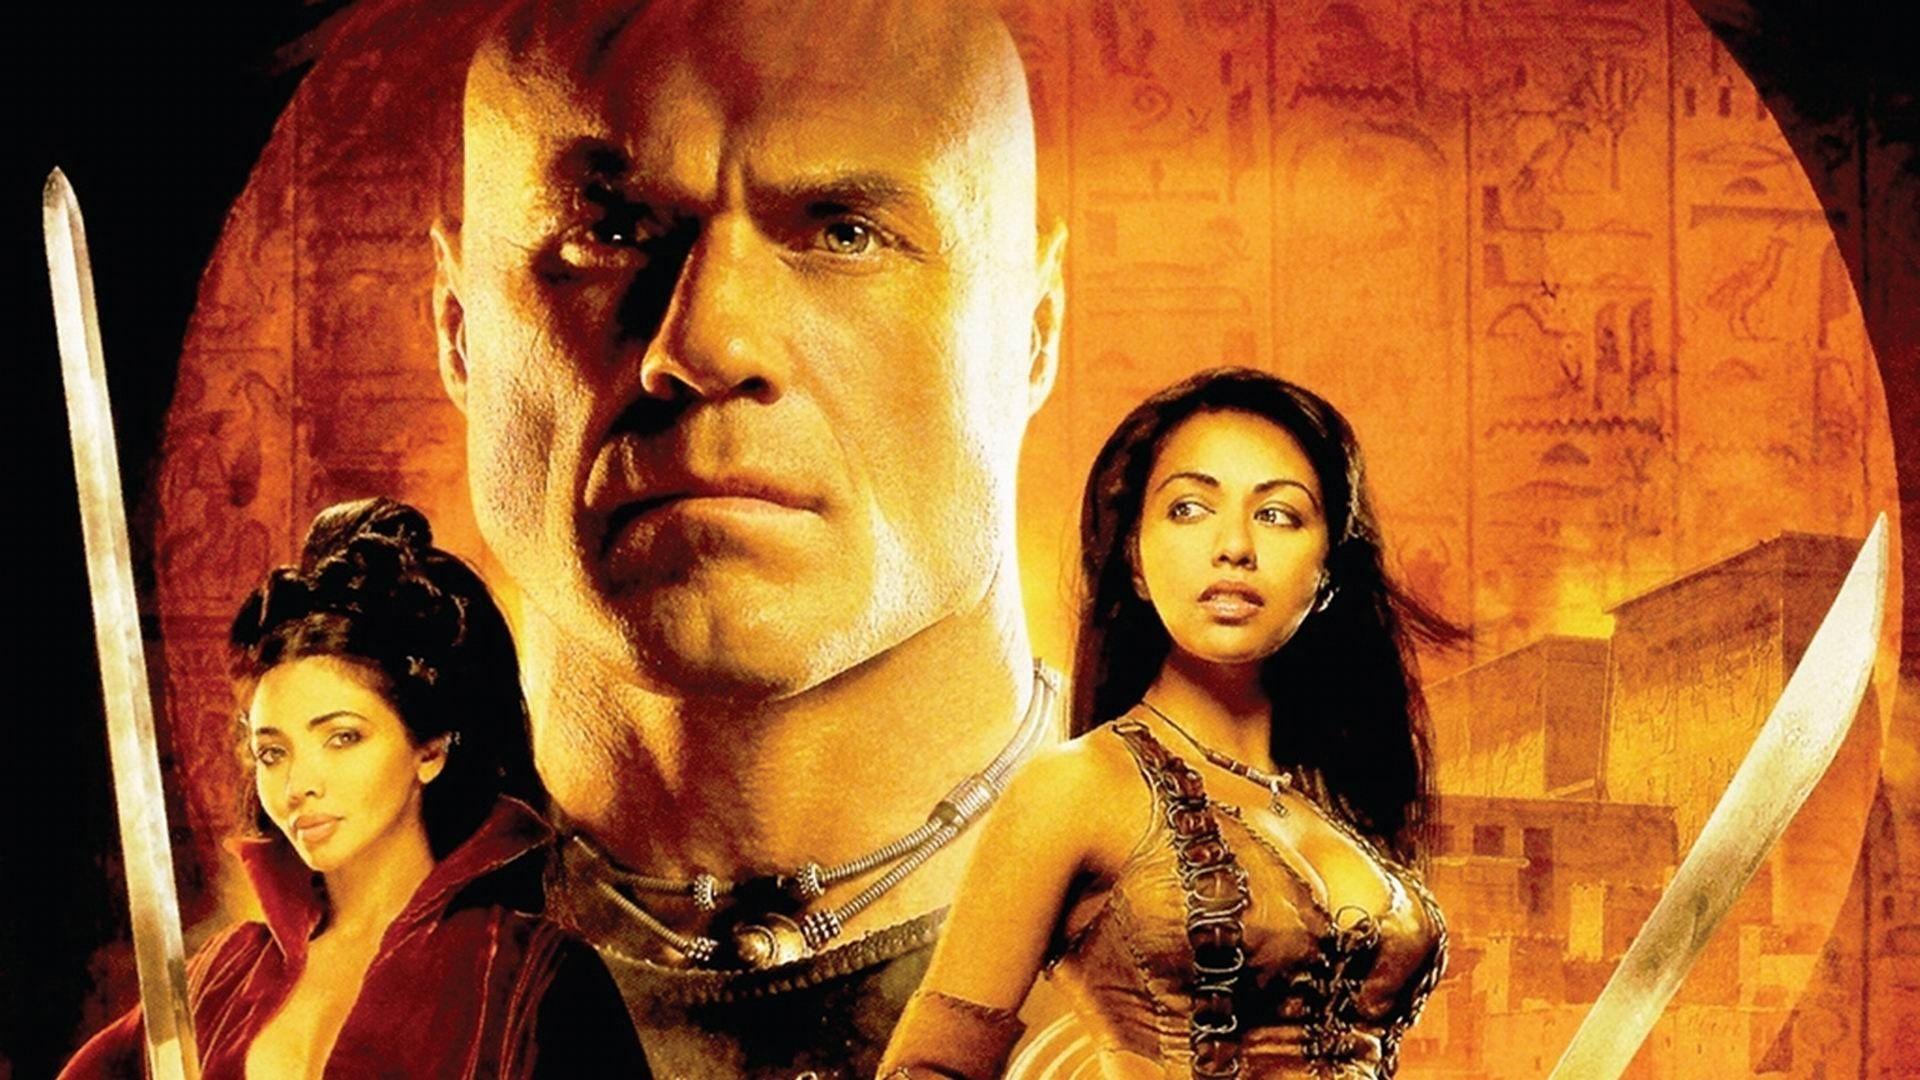 The Scorpion King 2: Rise Of A Warrior Full HD Wallpaper